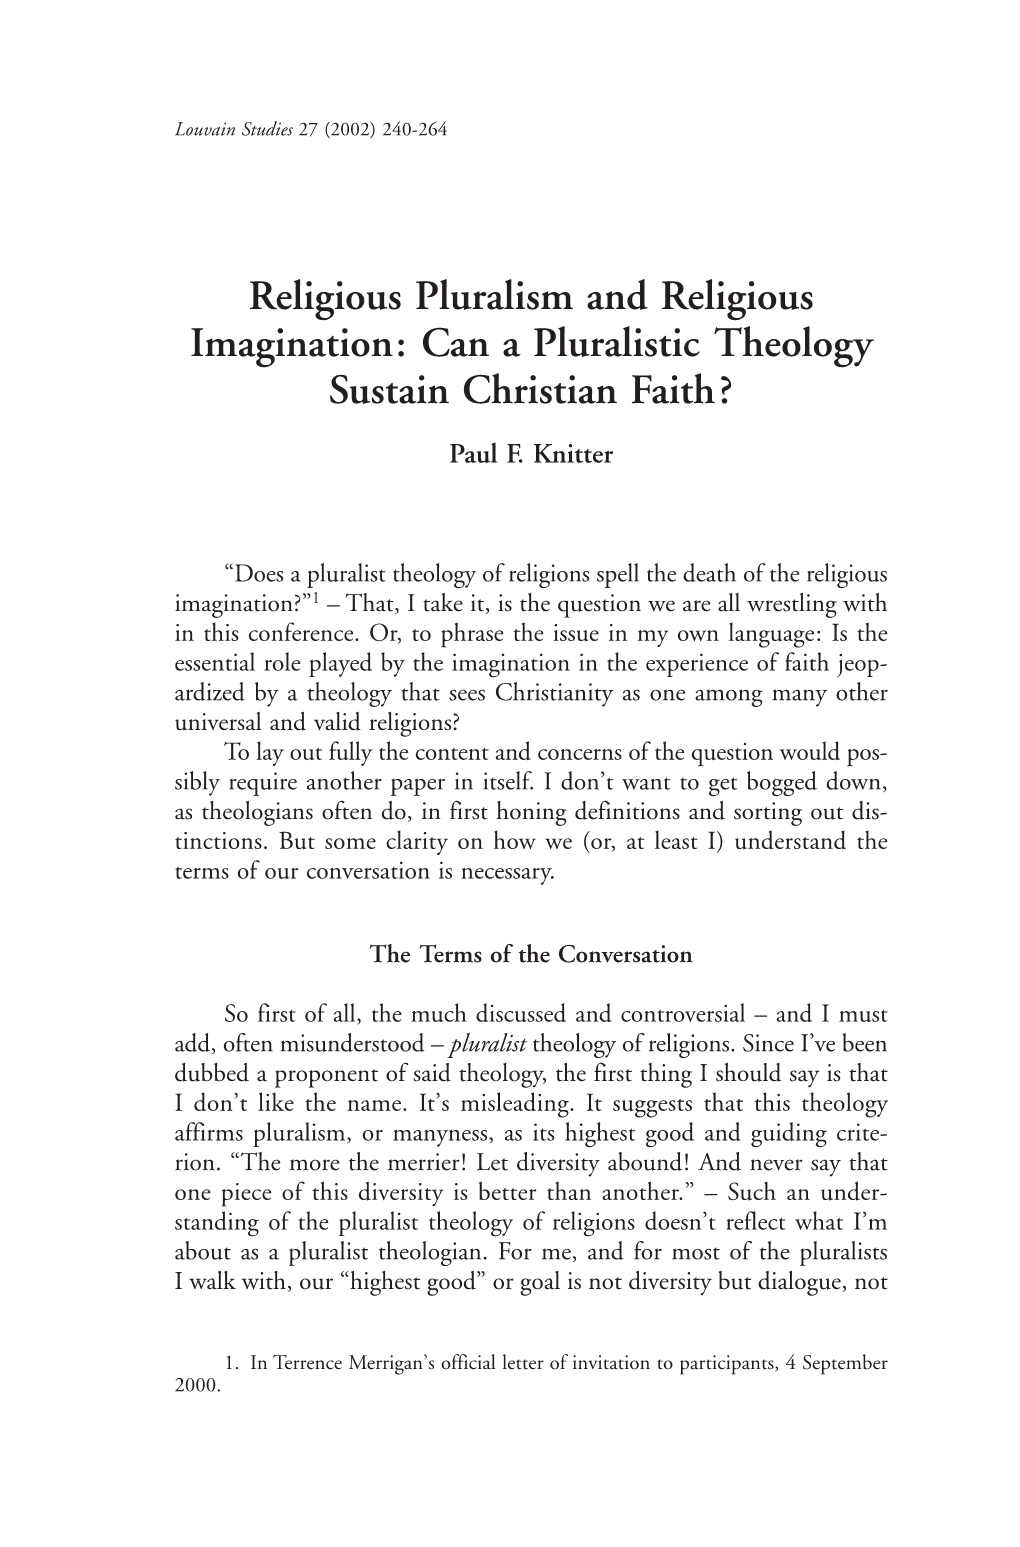 Religious Pluralism and Religious Imagination: Can a Pluralistic Theology Sustain Christian Faith? Paul F